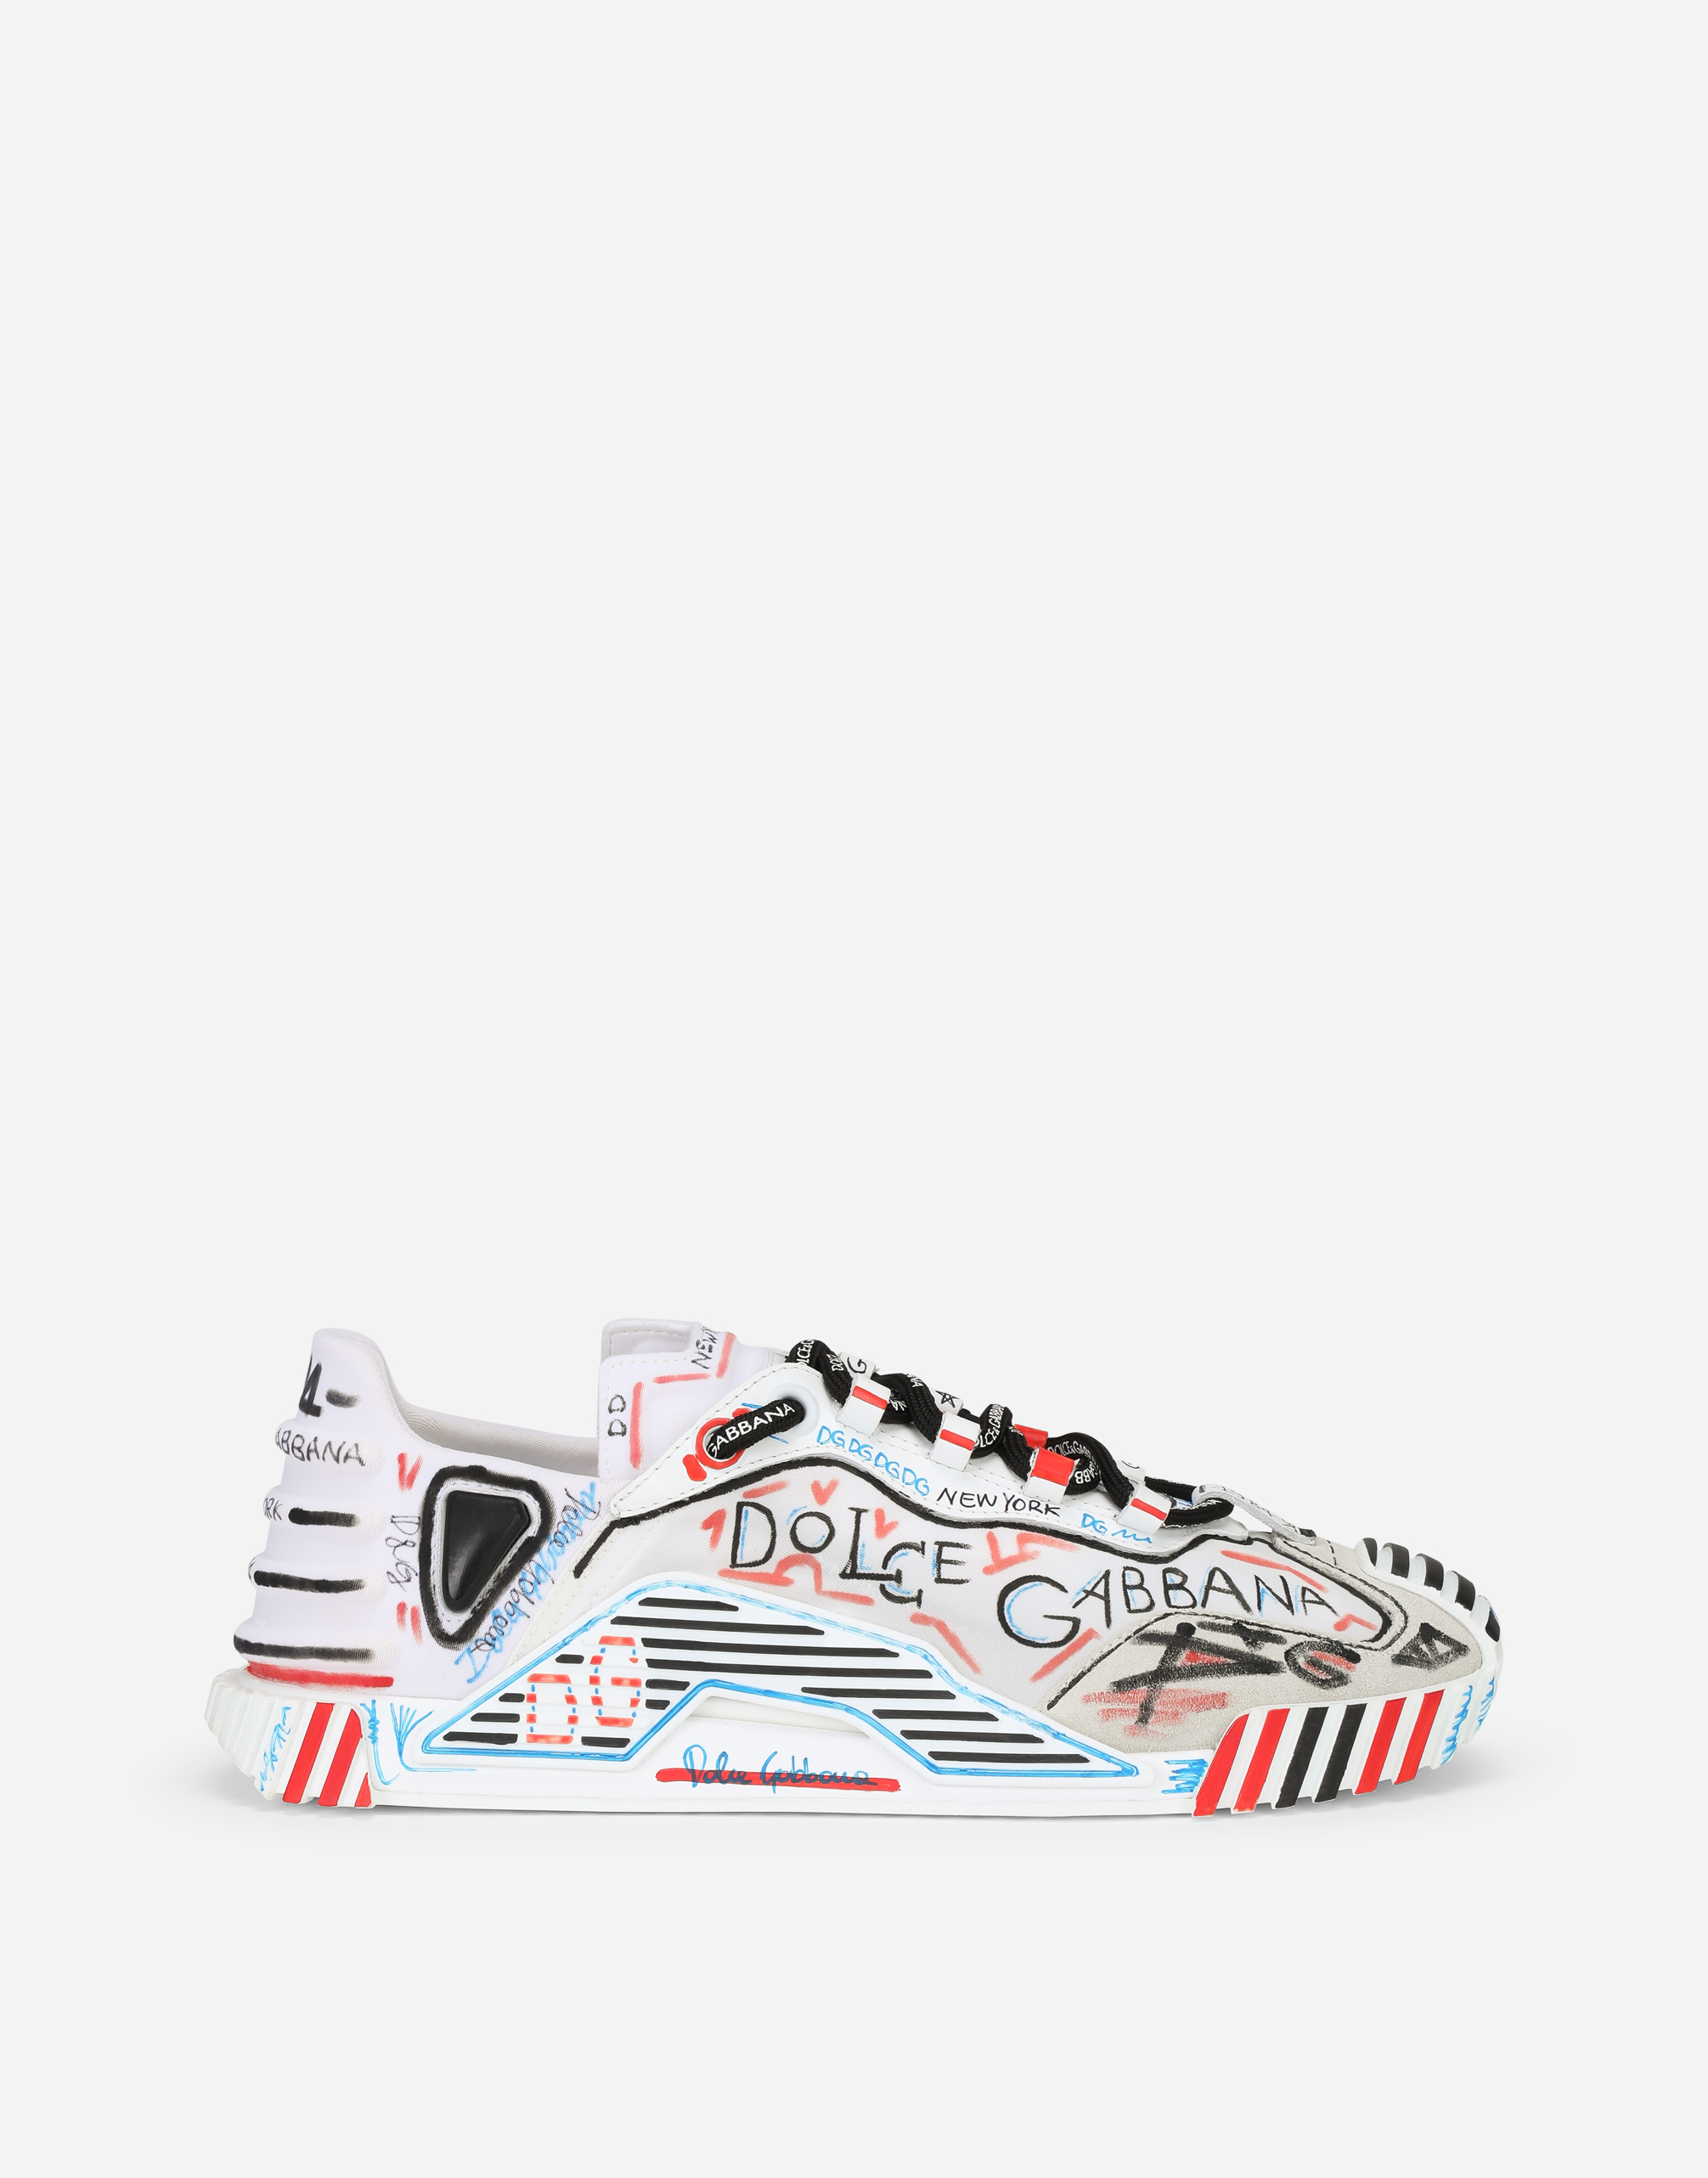 Mixed-materials Miami NS1 slip-on sneakers in New York